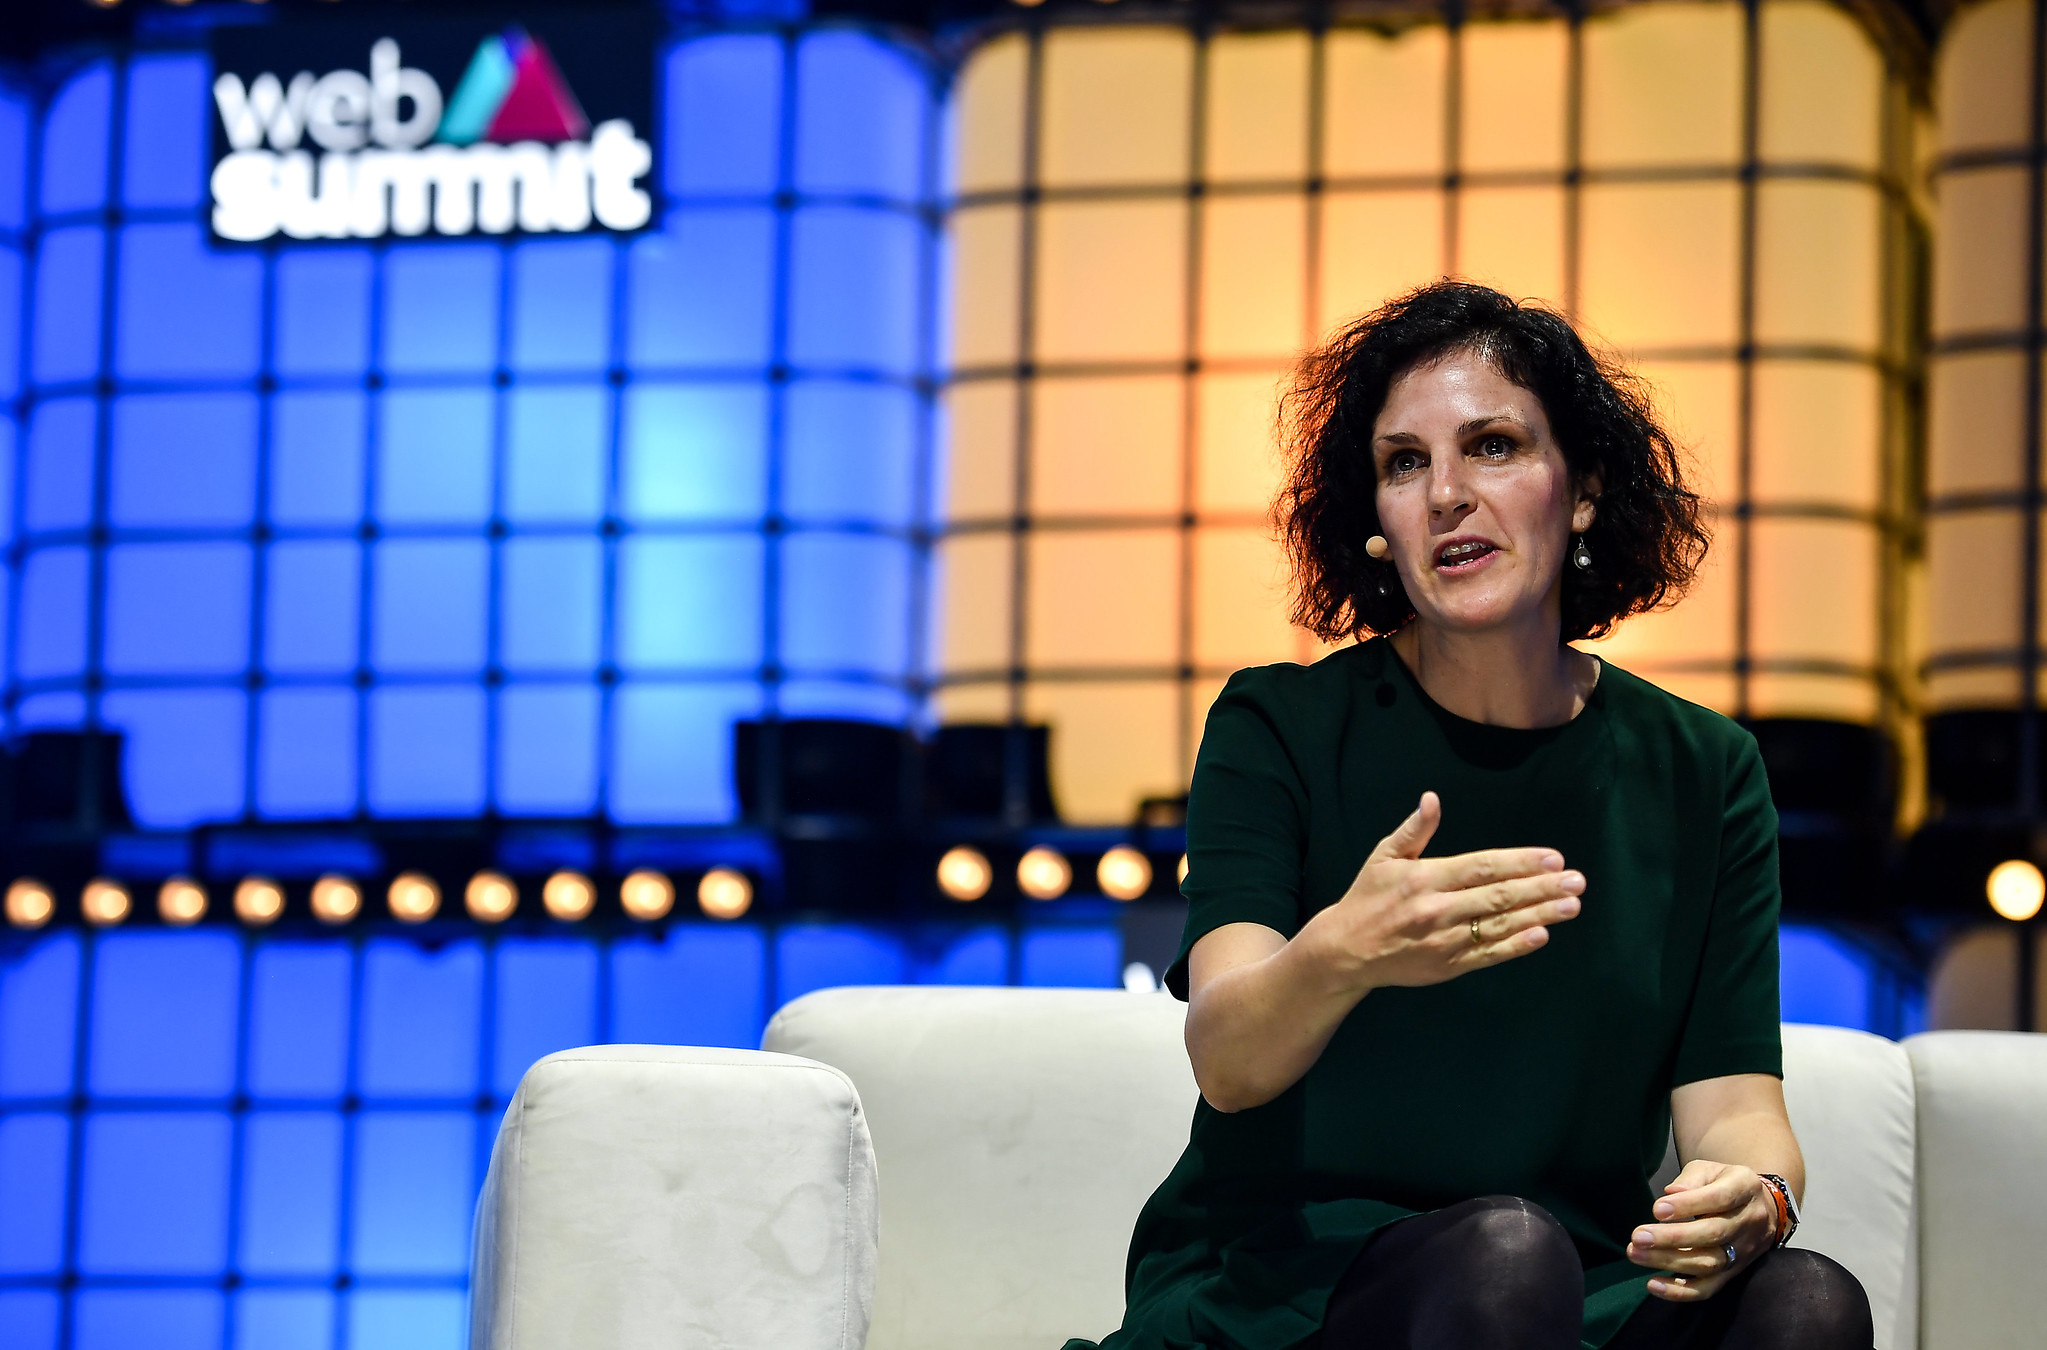 Barbara Martin Coppola, Chief Digital Officer, IKEA, on Centre Stage during the opening day of Web Summit 2019